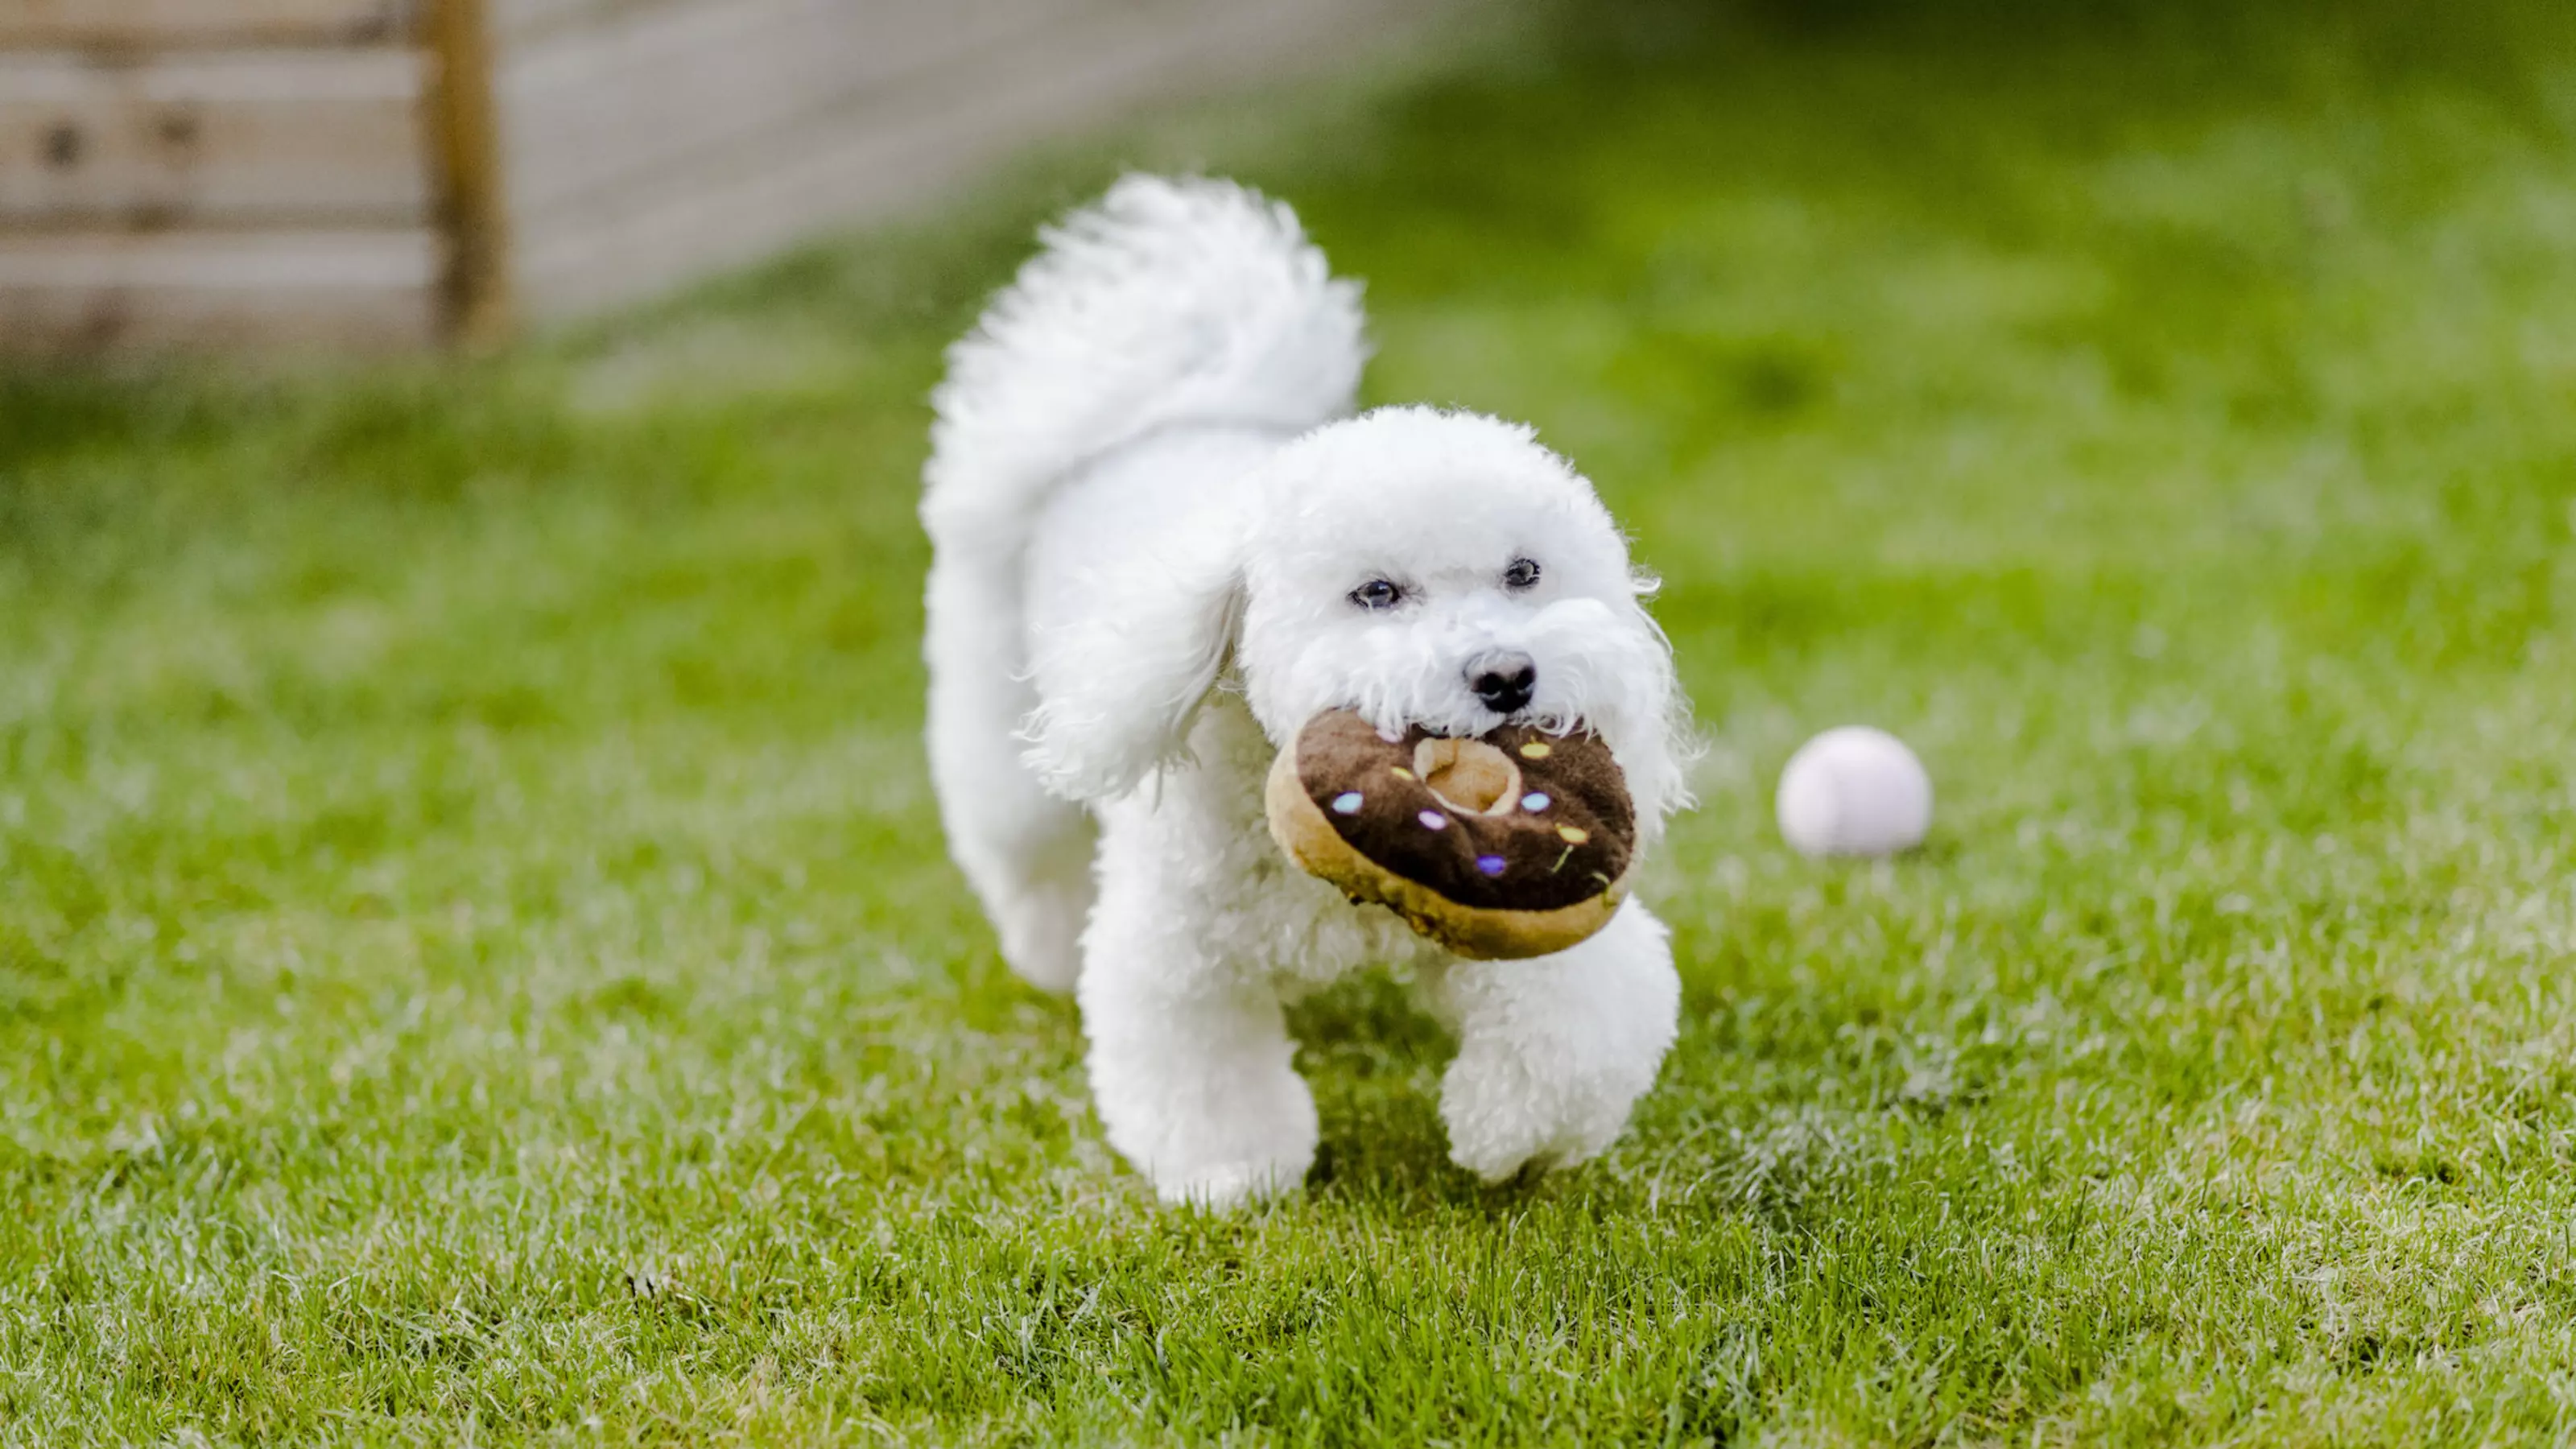 A white fluffy dog with a toy doughnut 